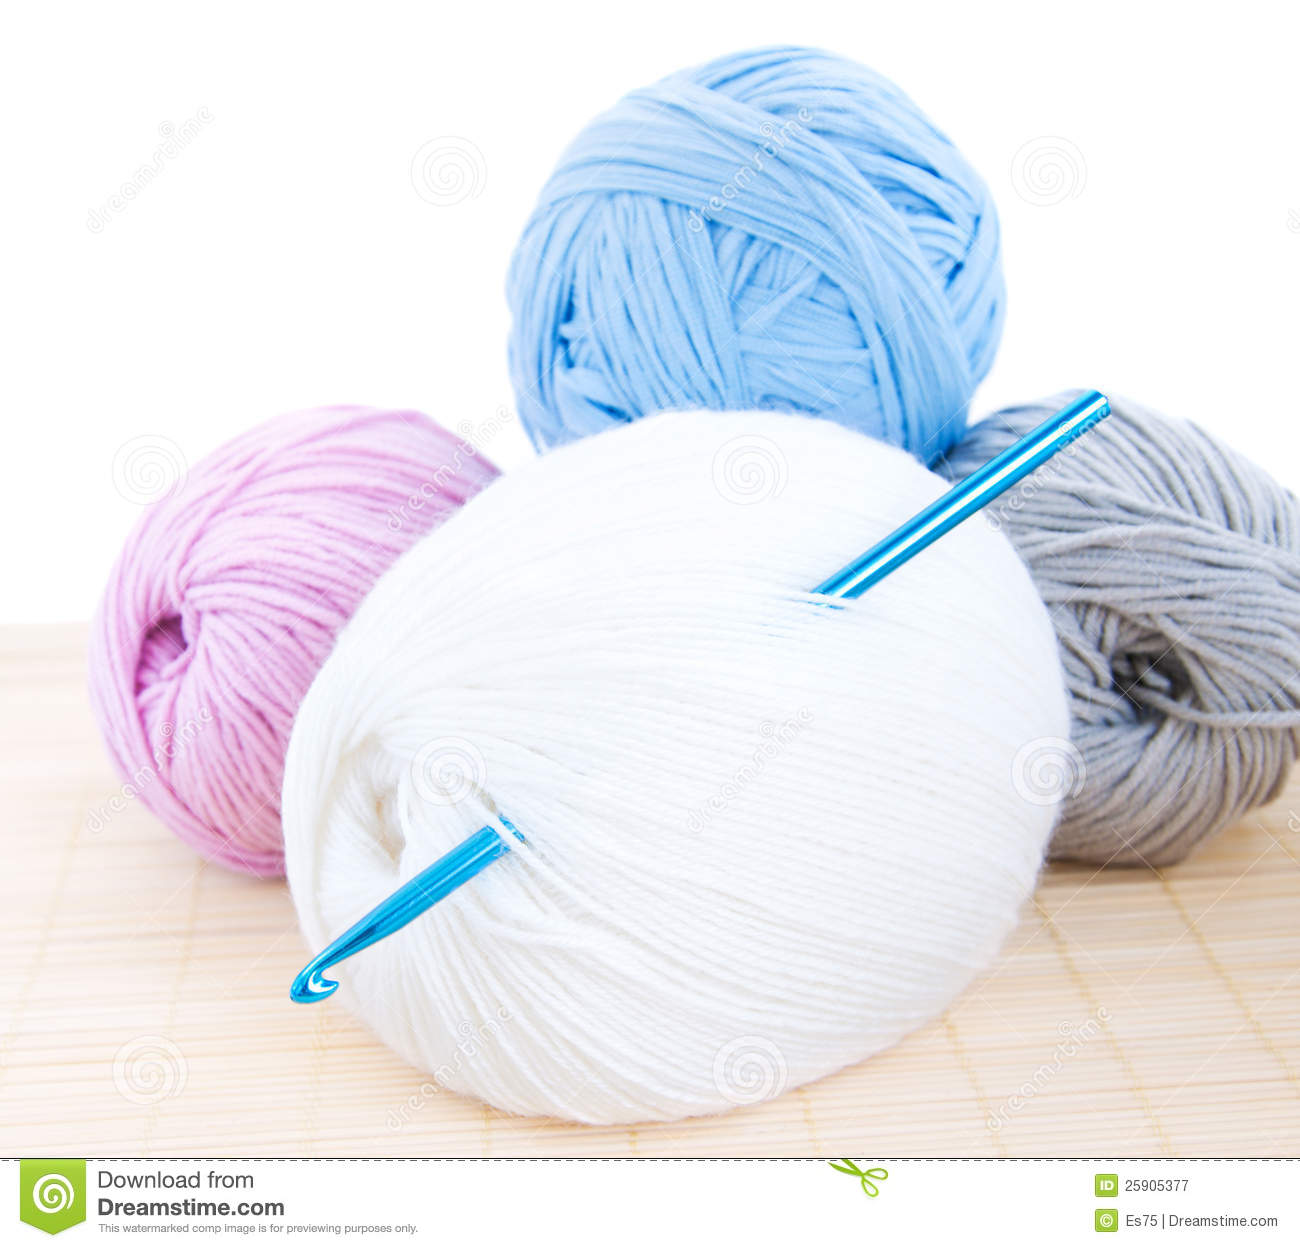 Crochet Hook And Yarn Royalty Free Stock Photography   Image  25905377